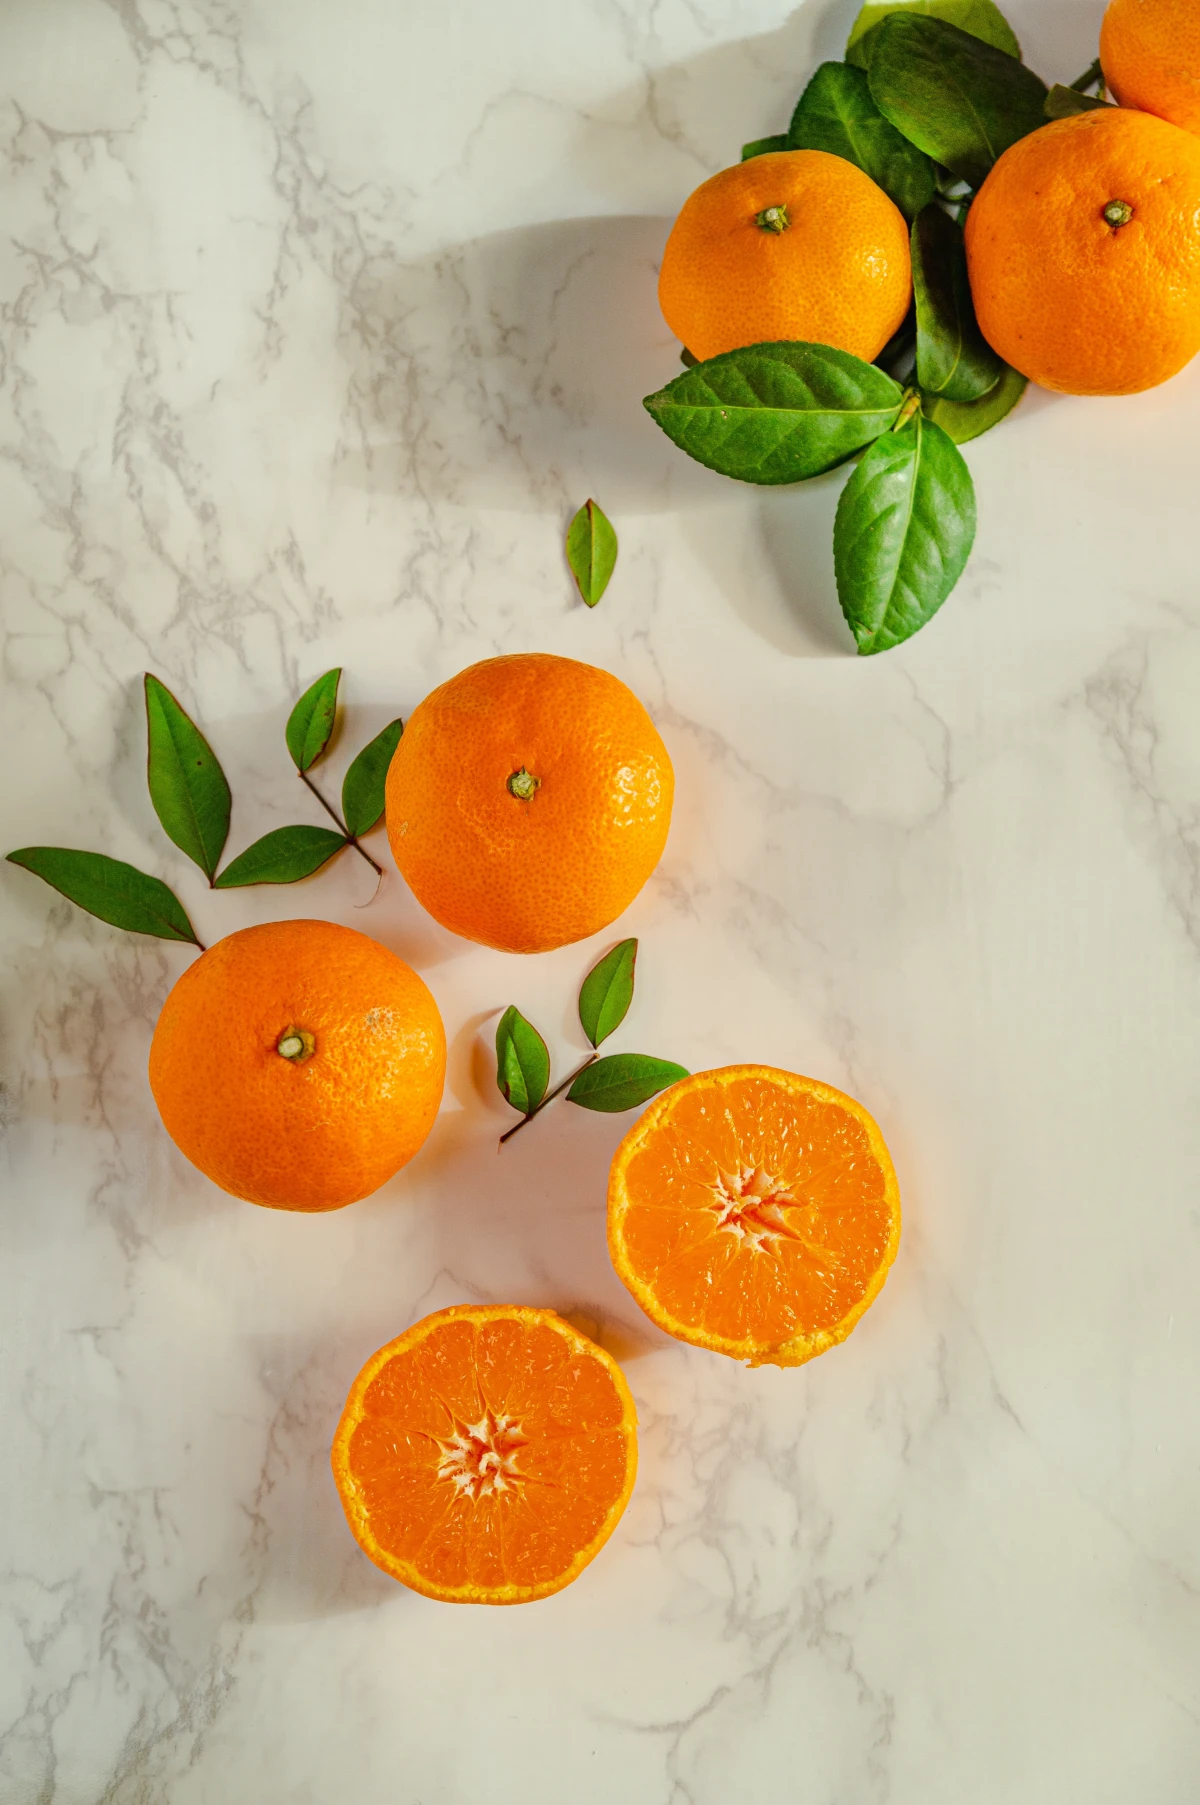 mandarins whole and halved on marble counter